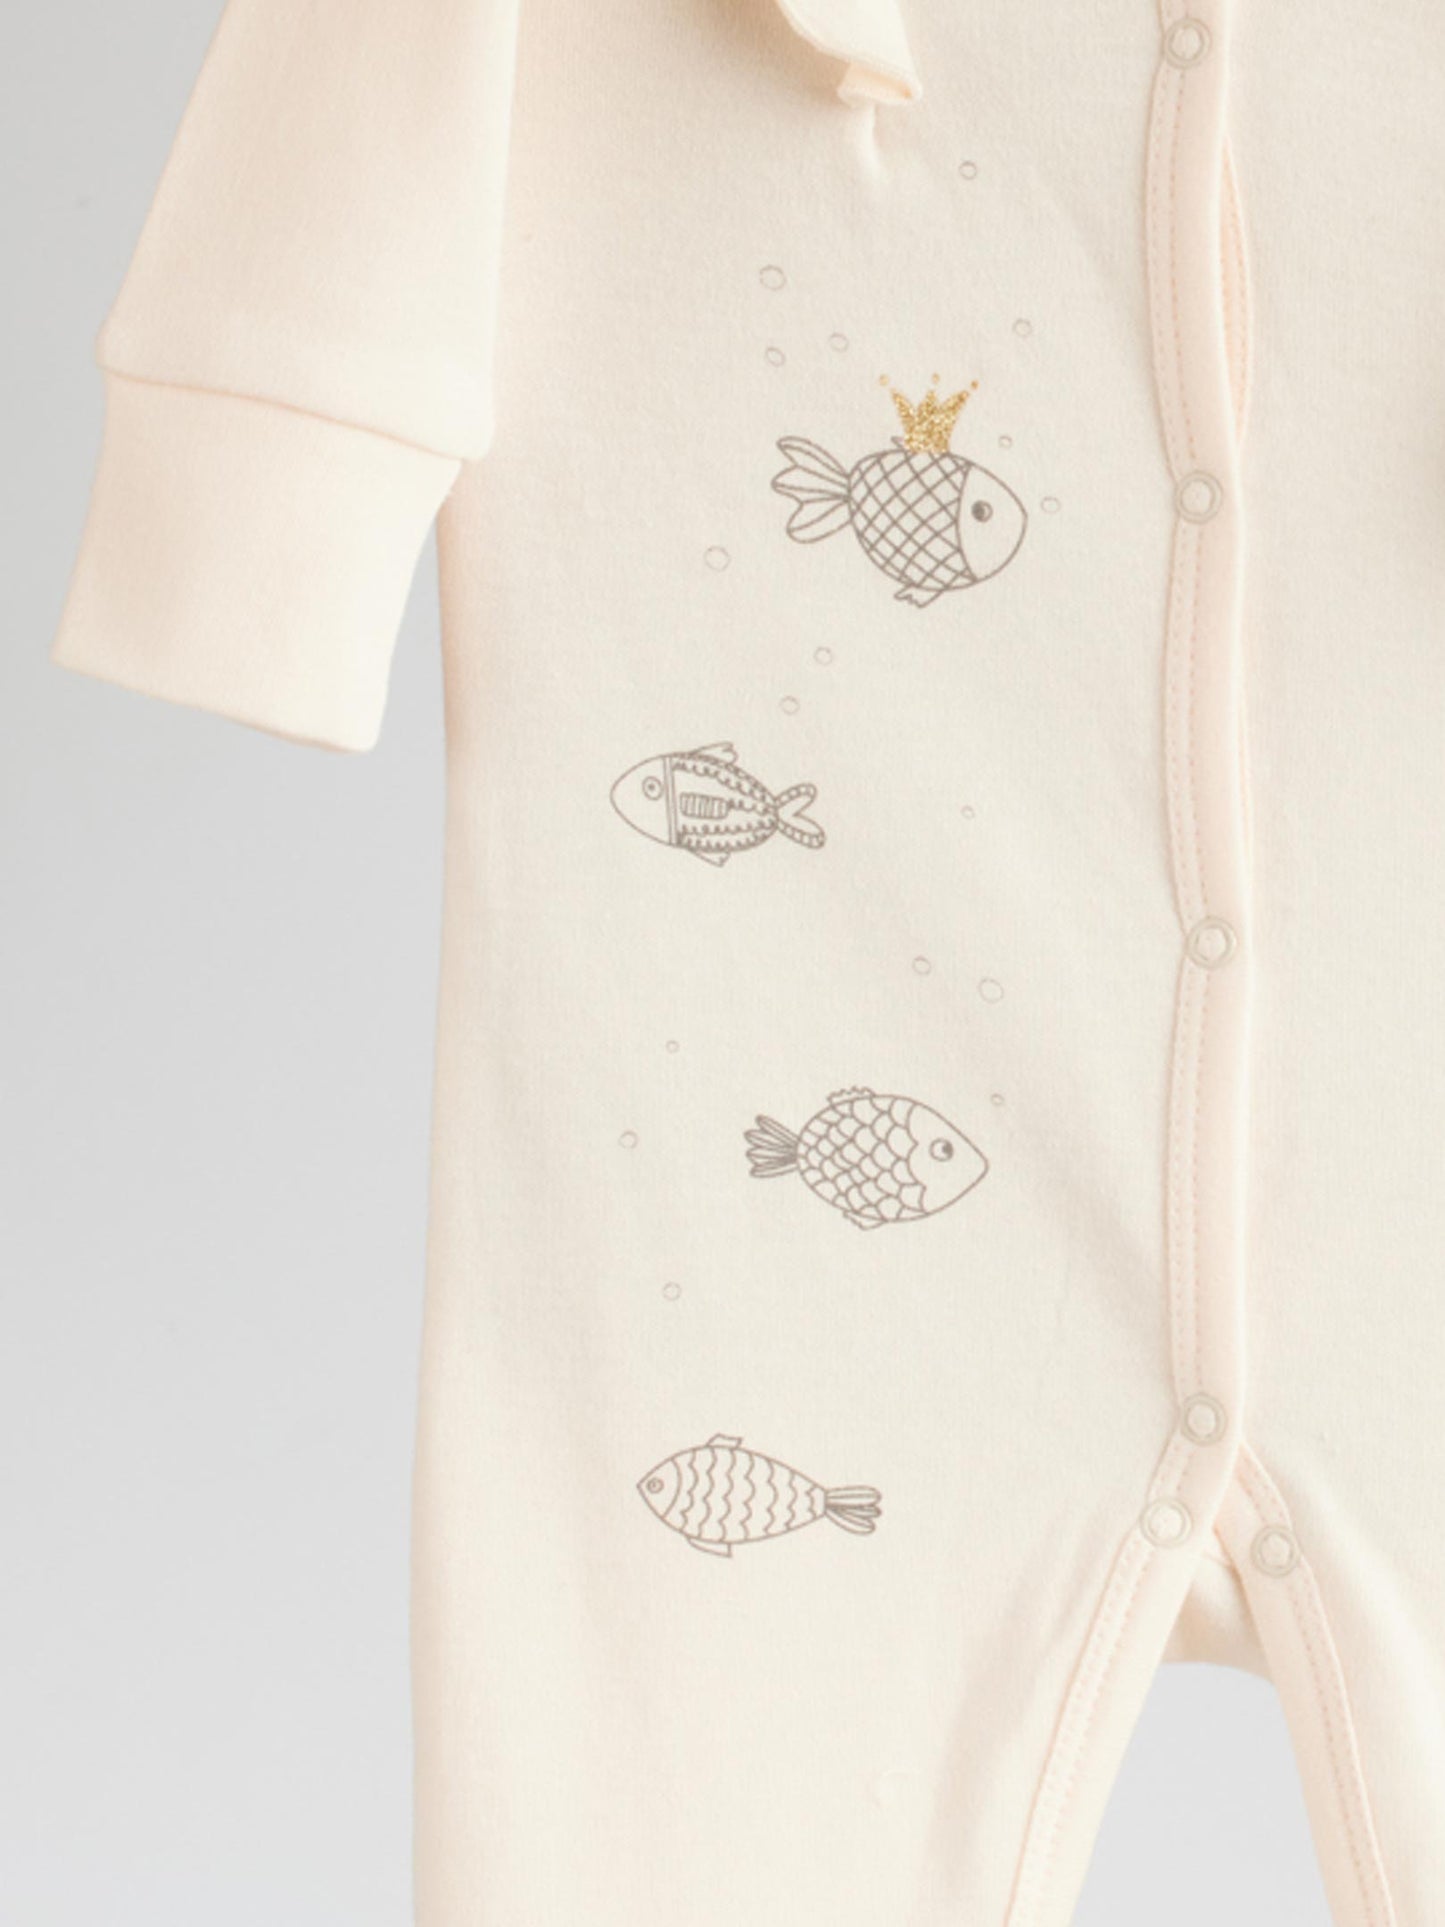 Infant Overall Gold Fish 308 has four fishes and small bubbles printed on the right side, making it look both elegant and cute